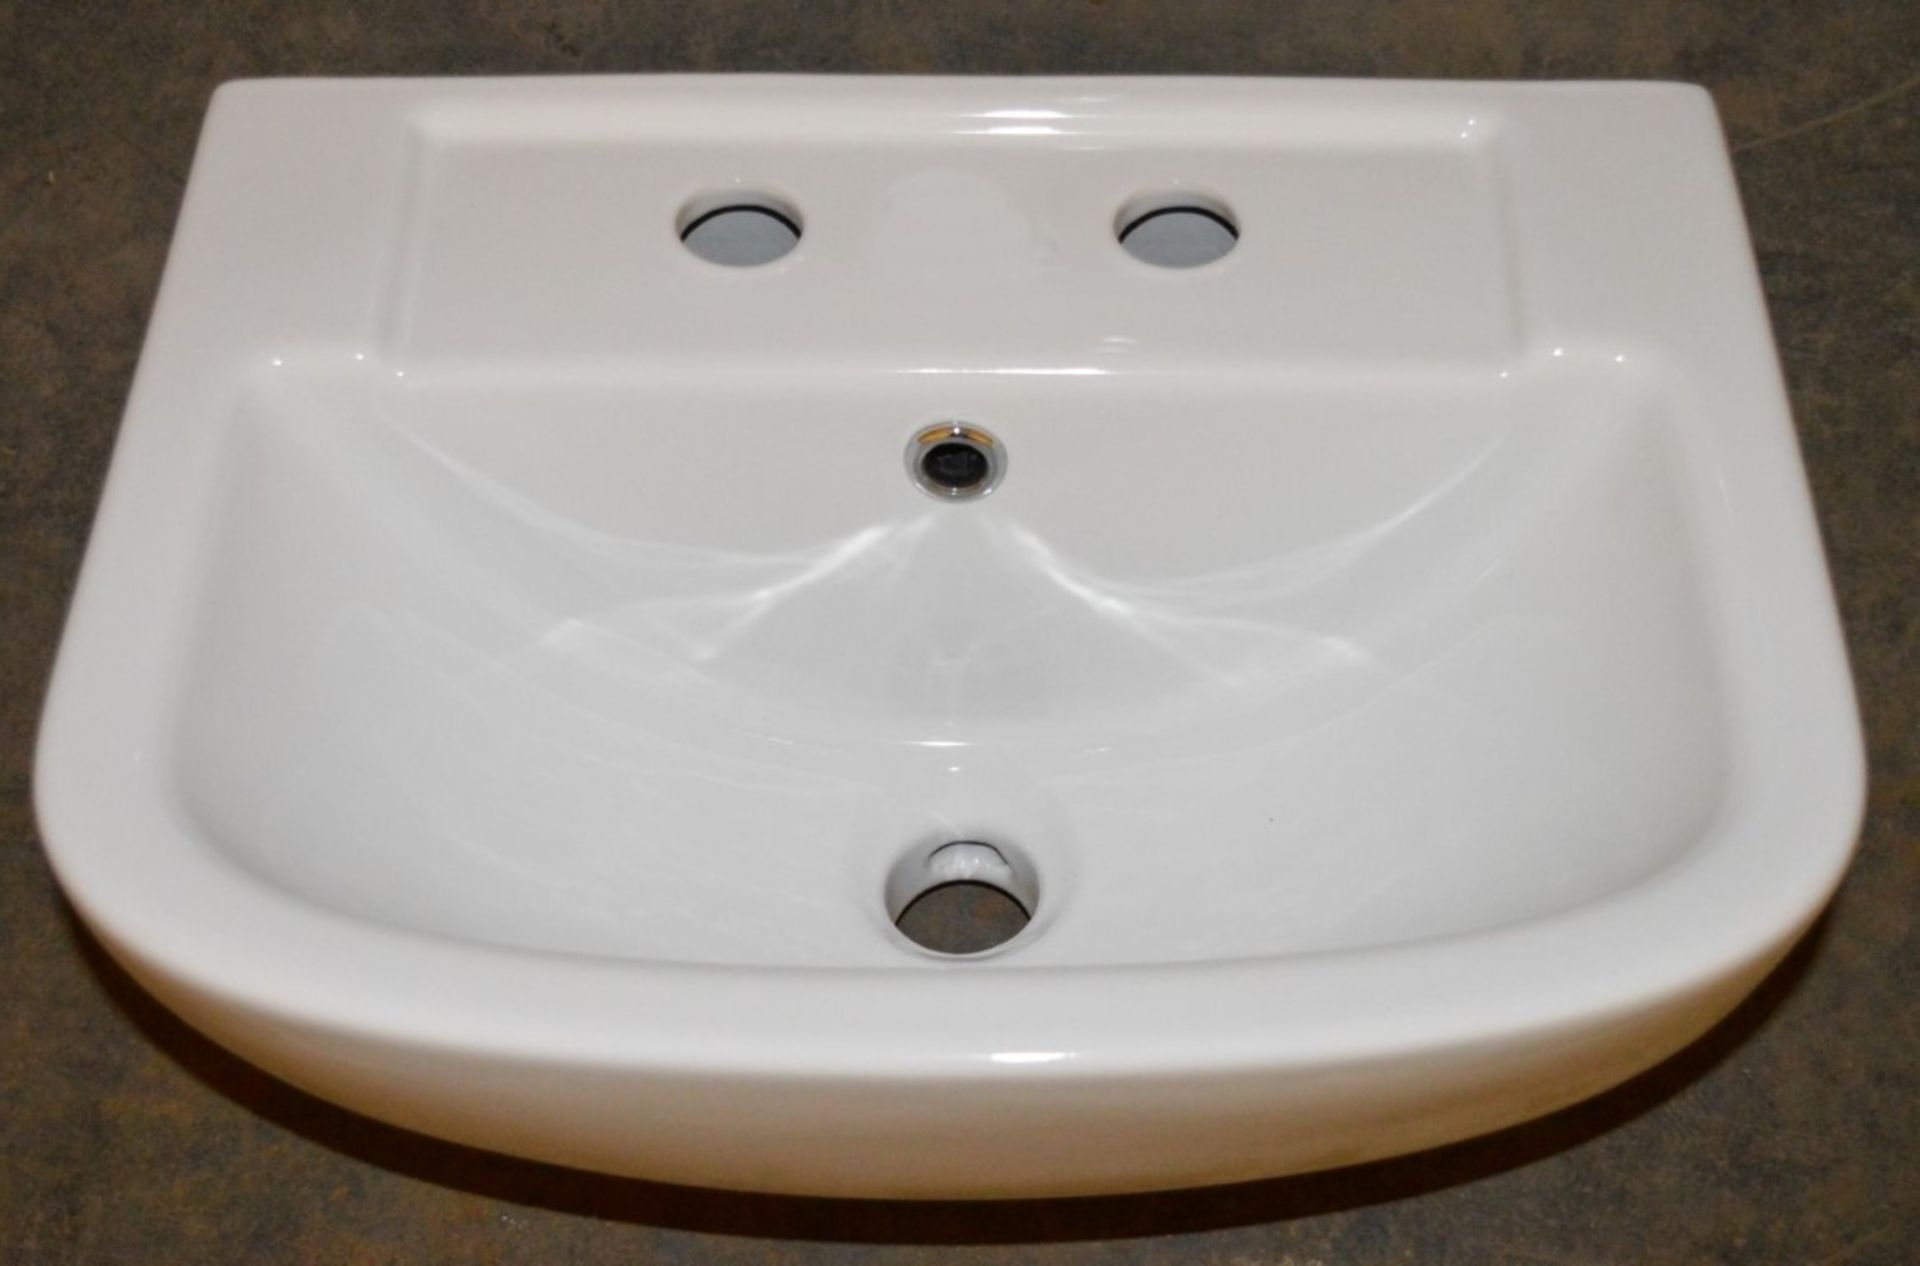 10 x Vogue Bathrooms ZERO Two Tap Hole WALL HUNG SINK BASINS - 450mm Width - Brand New Boxed Stock - - Image 2 of 2